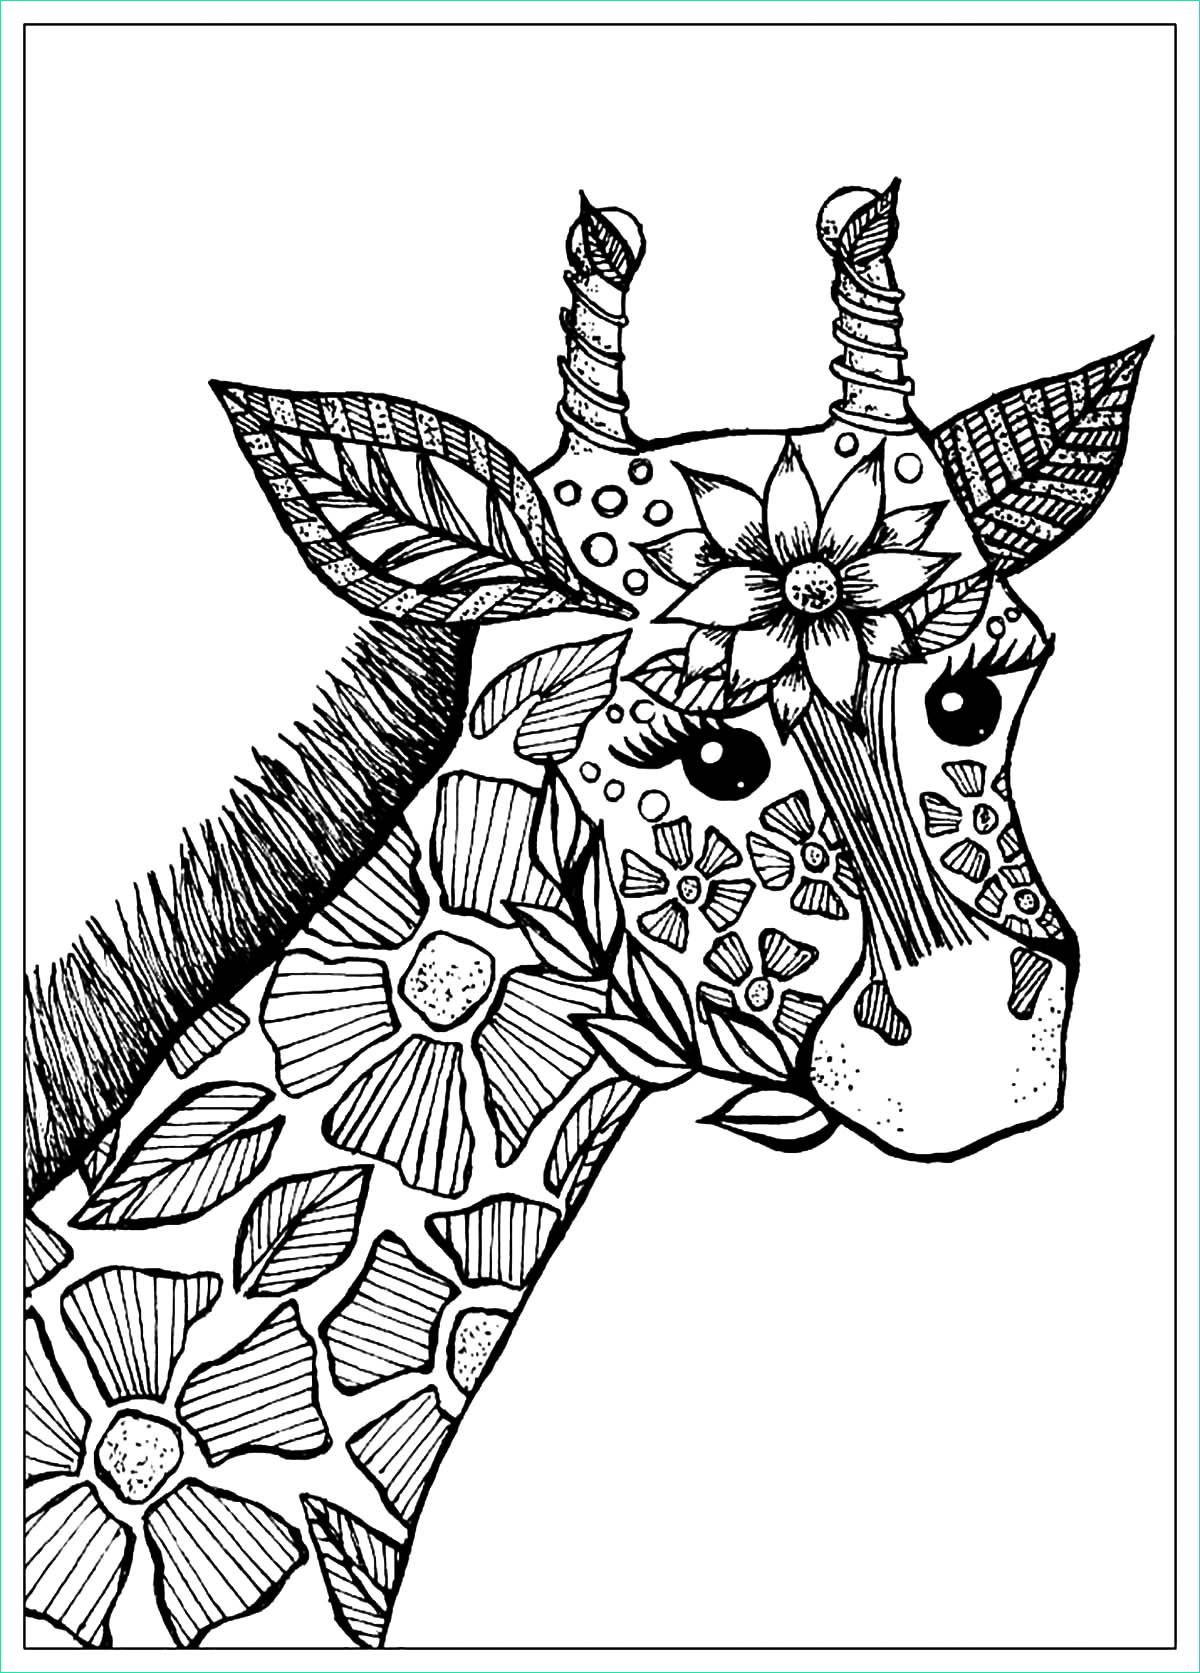 Coloriage Animal Impressionnant Image Giraffe Head with Flowers Giraffes Adult Coloring Pages